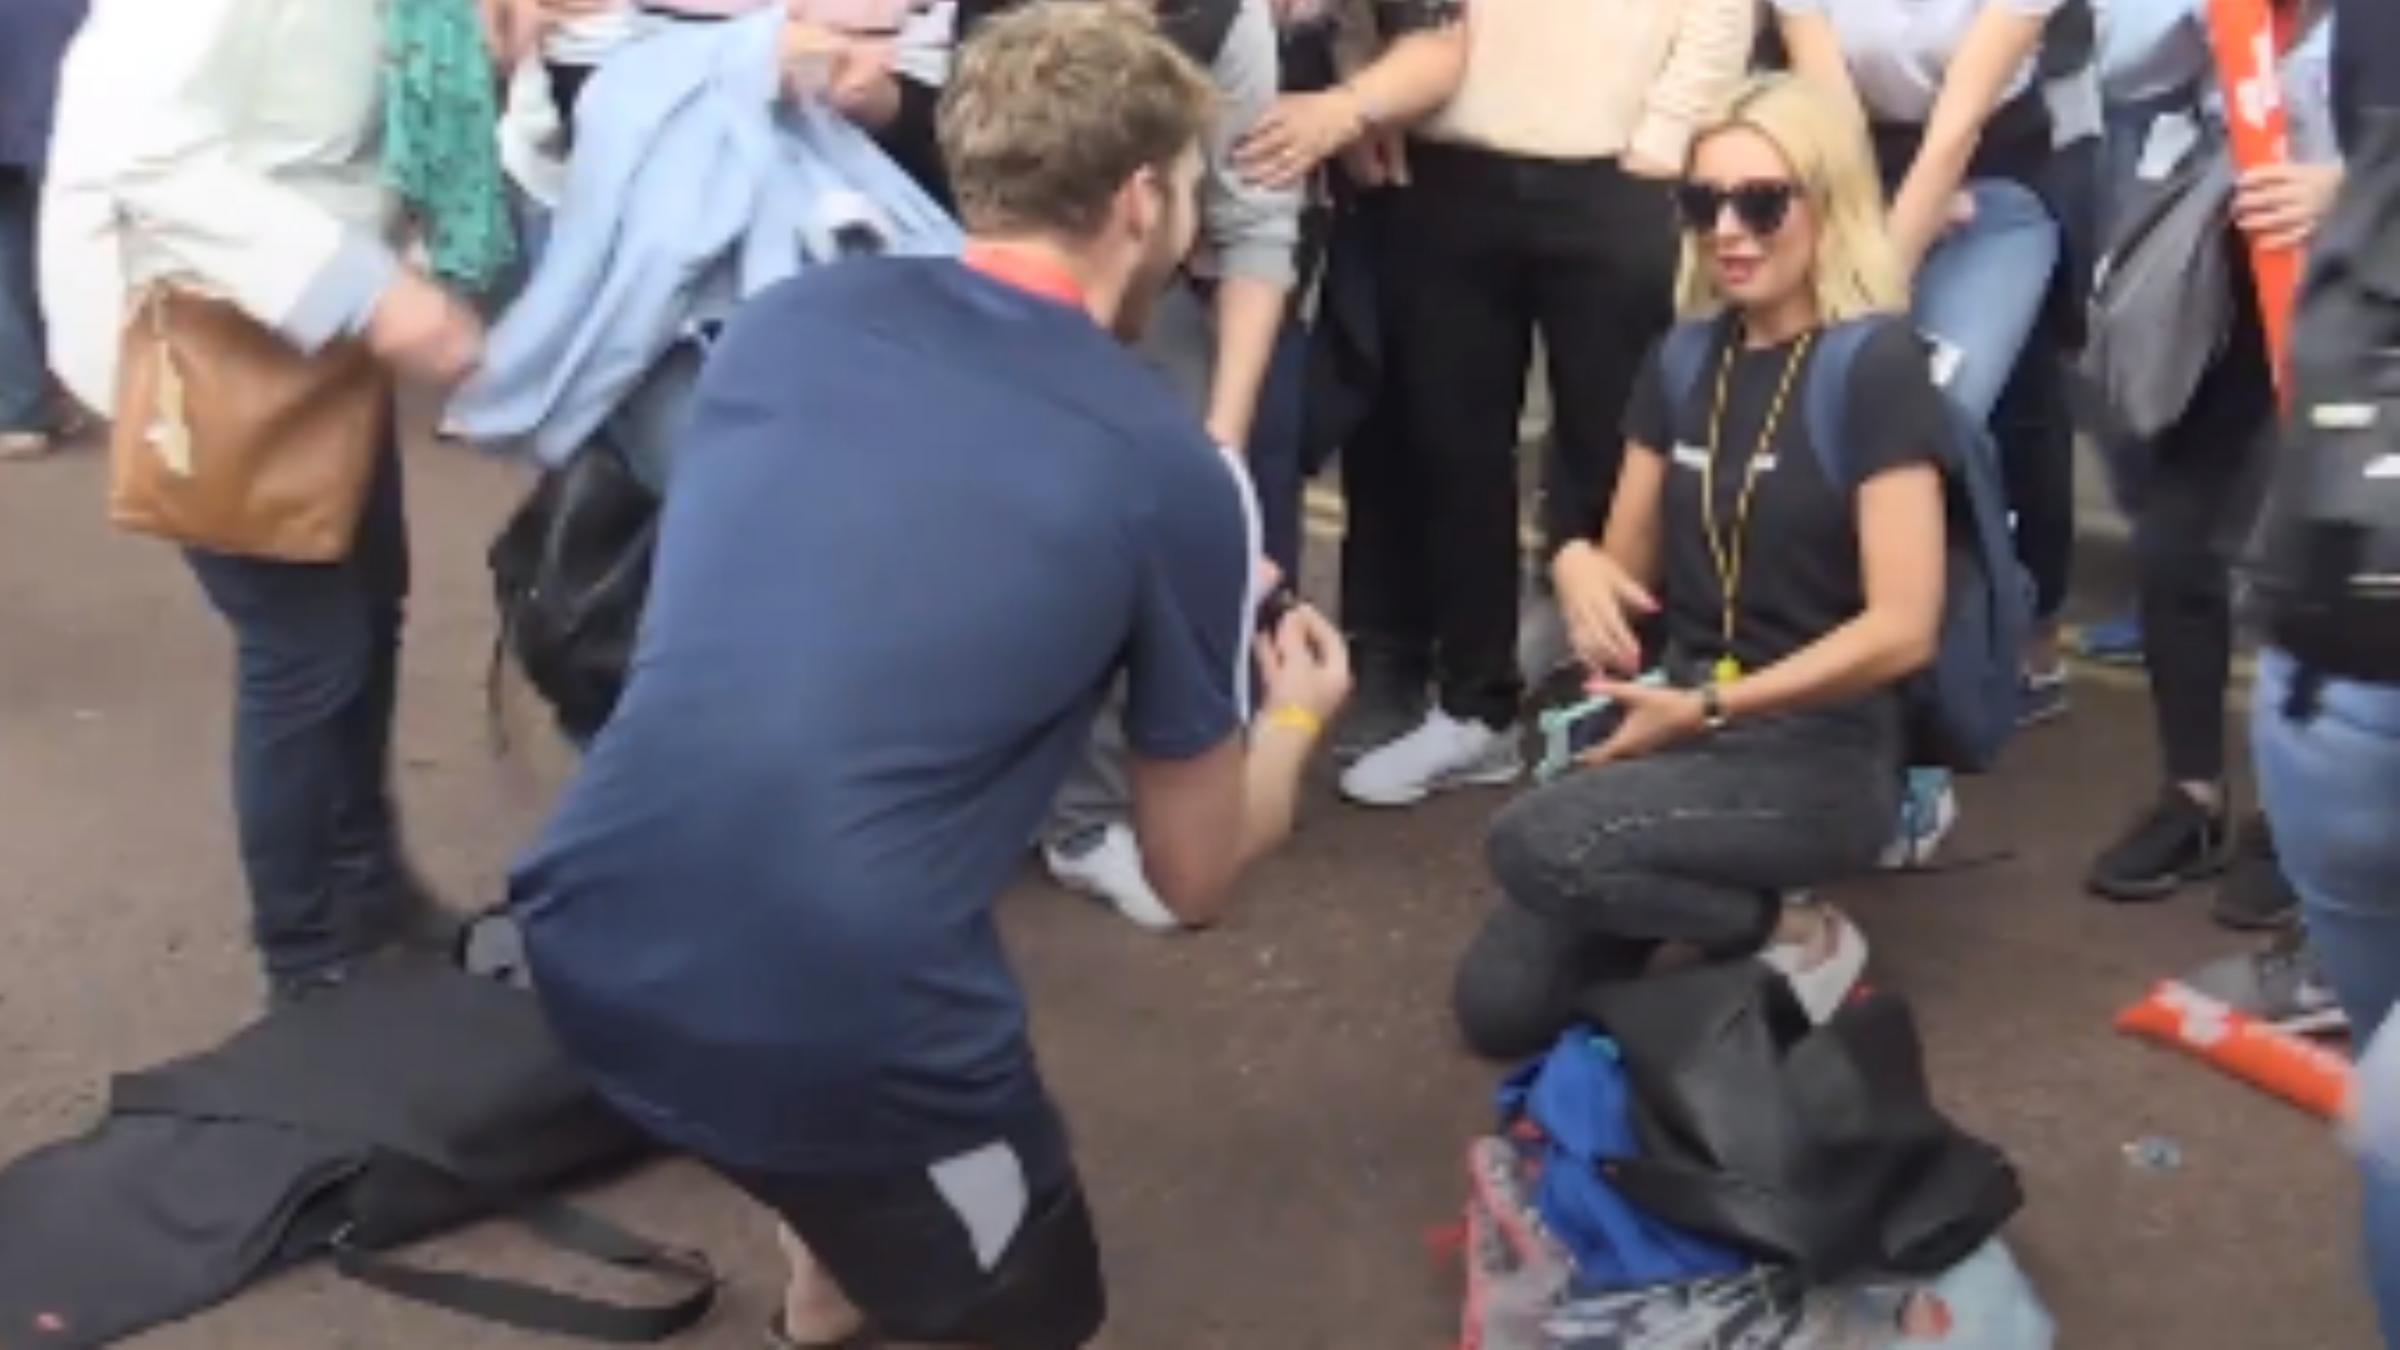 In video: London Marathon runner proposes at the finish line - Hillingdon Times